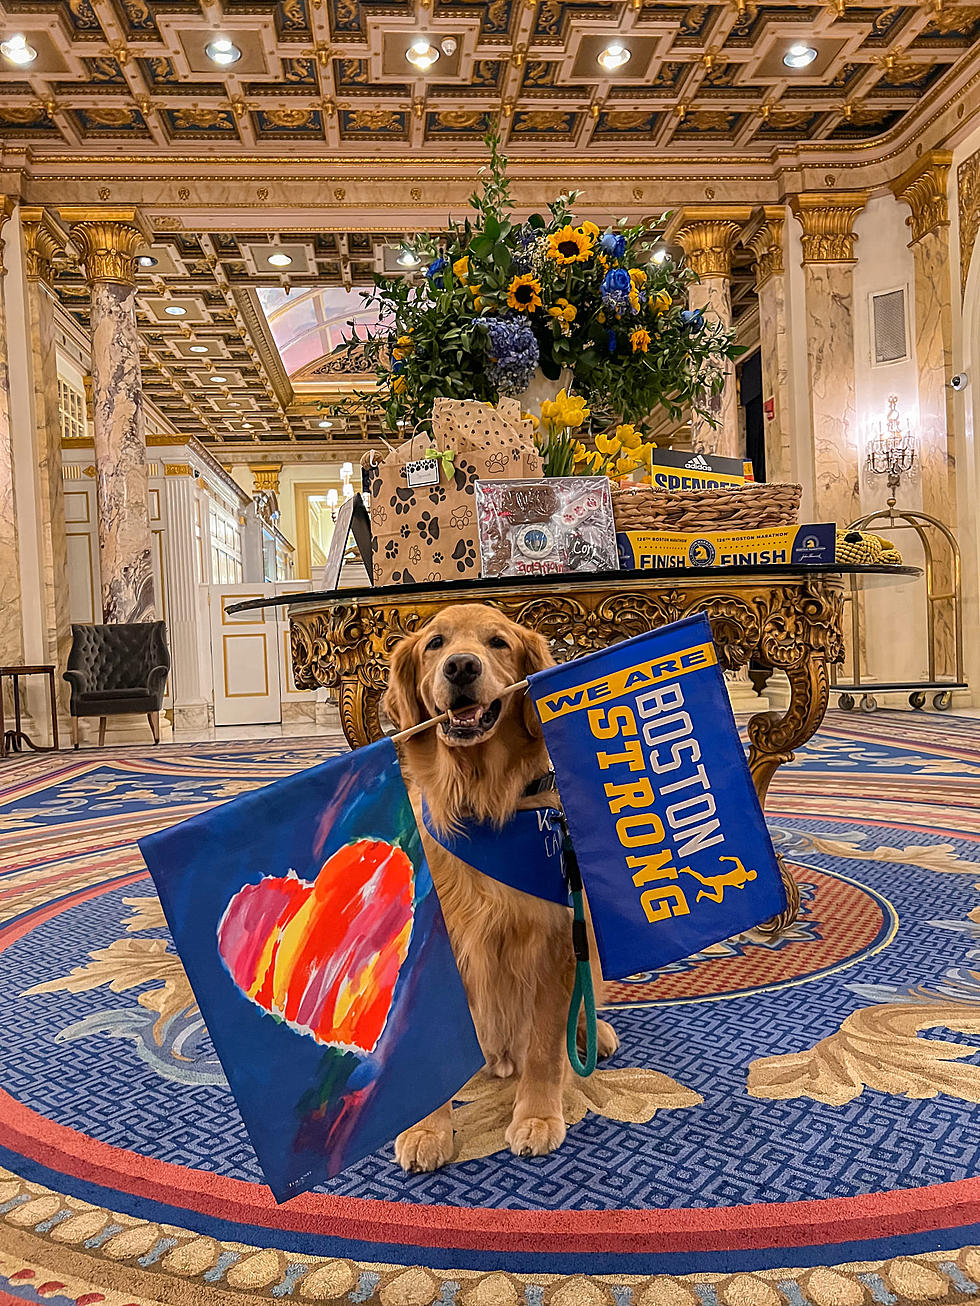 The Official Dog of the Boston Marathon Arrived in Style for Good Reason